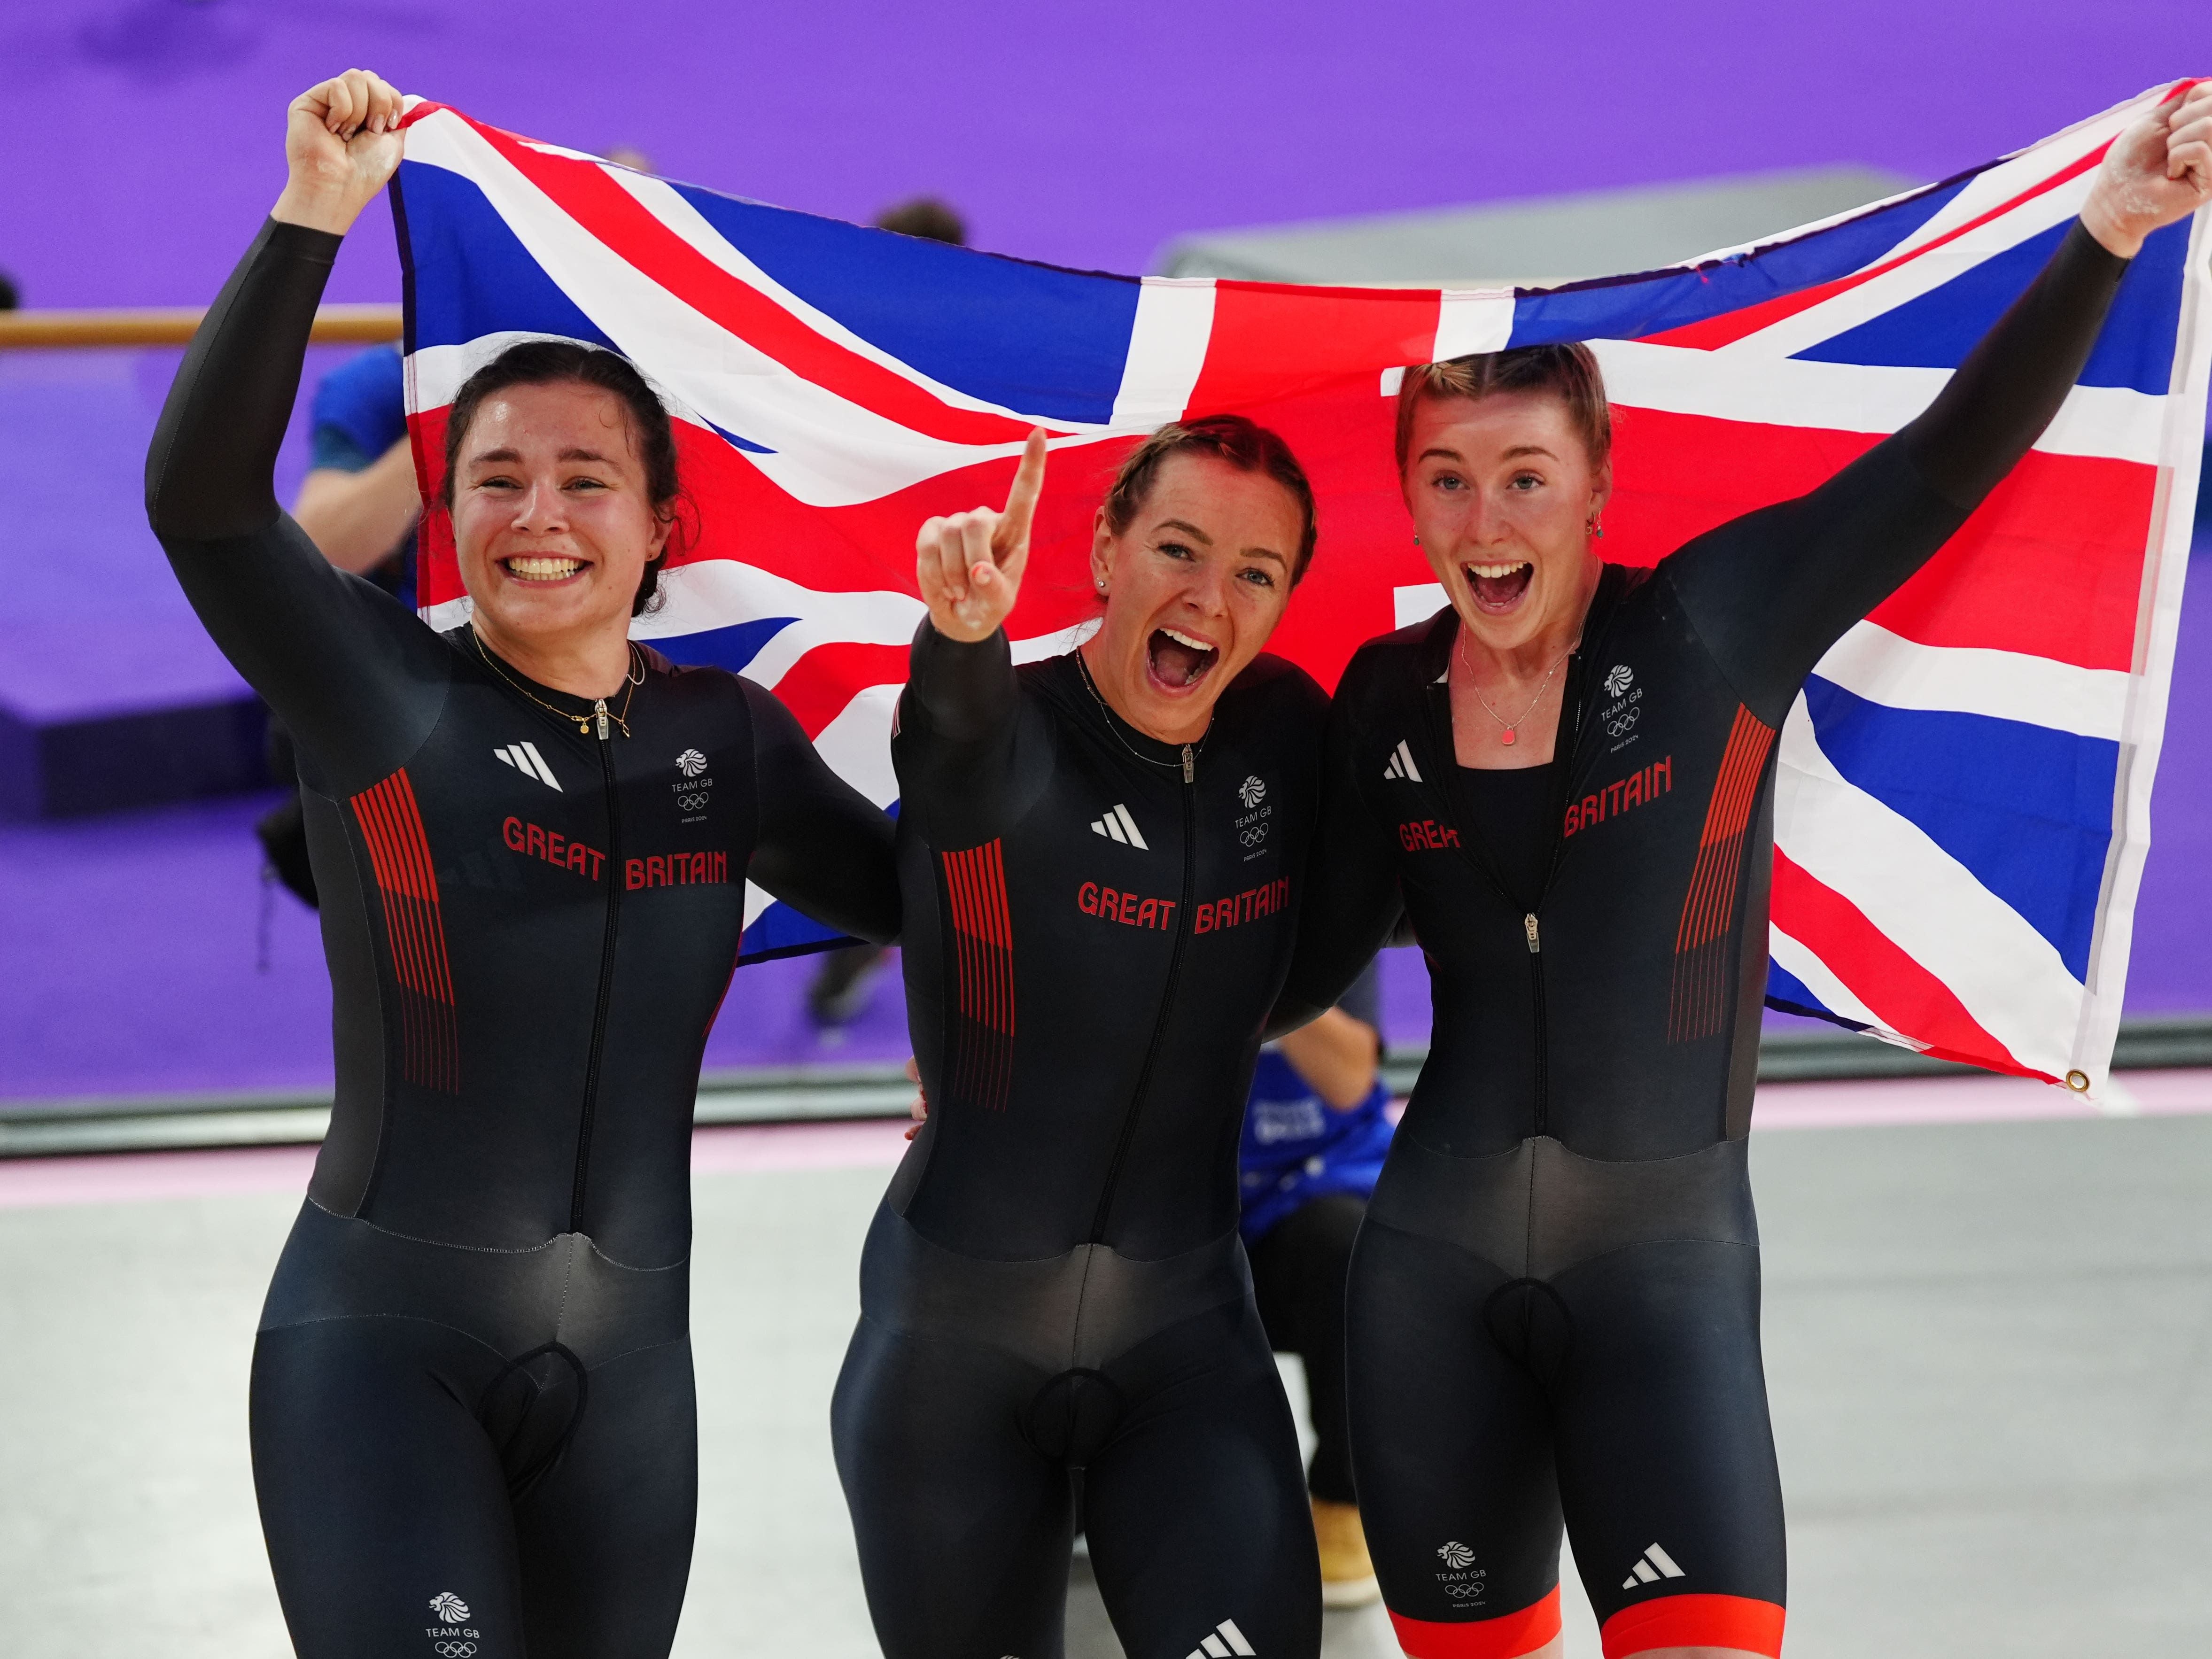 ‘It doesn’t get much better than that’ – Team GB win women’s team sprint gold